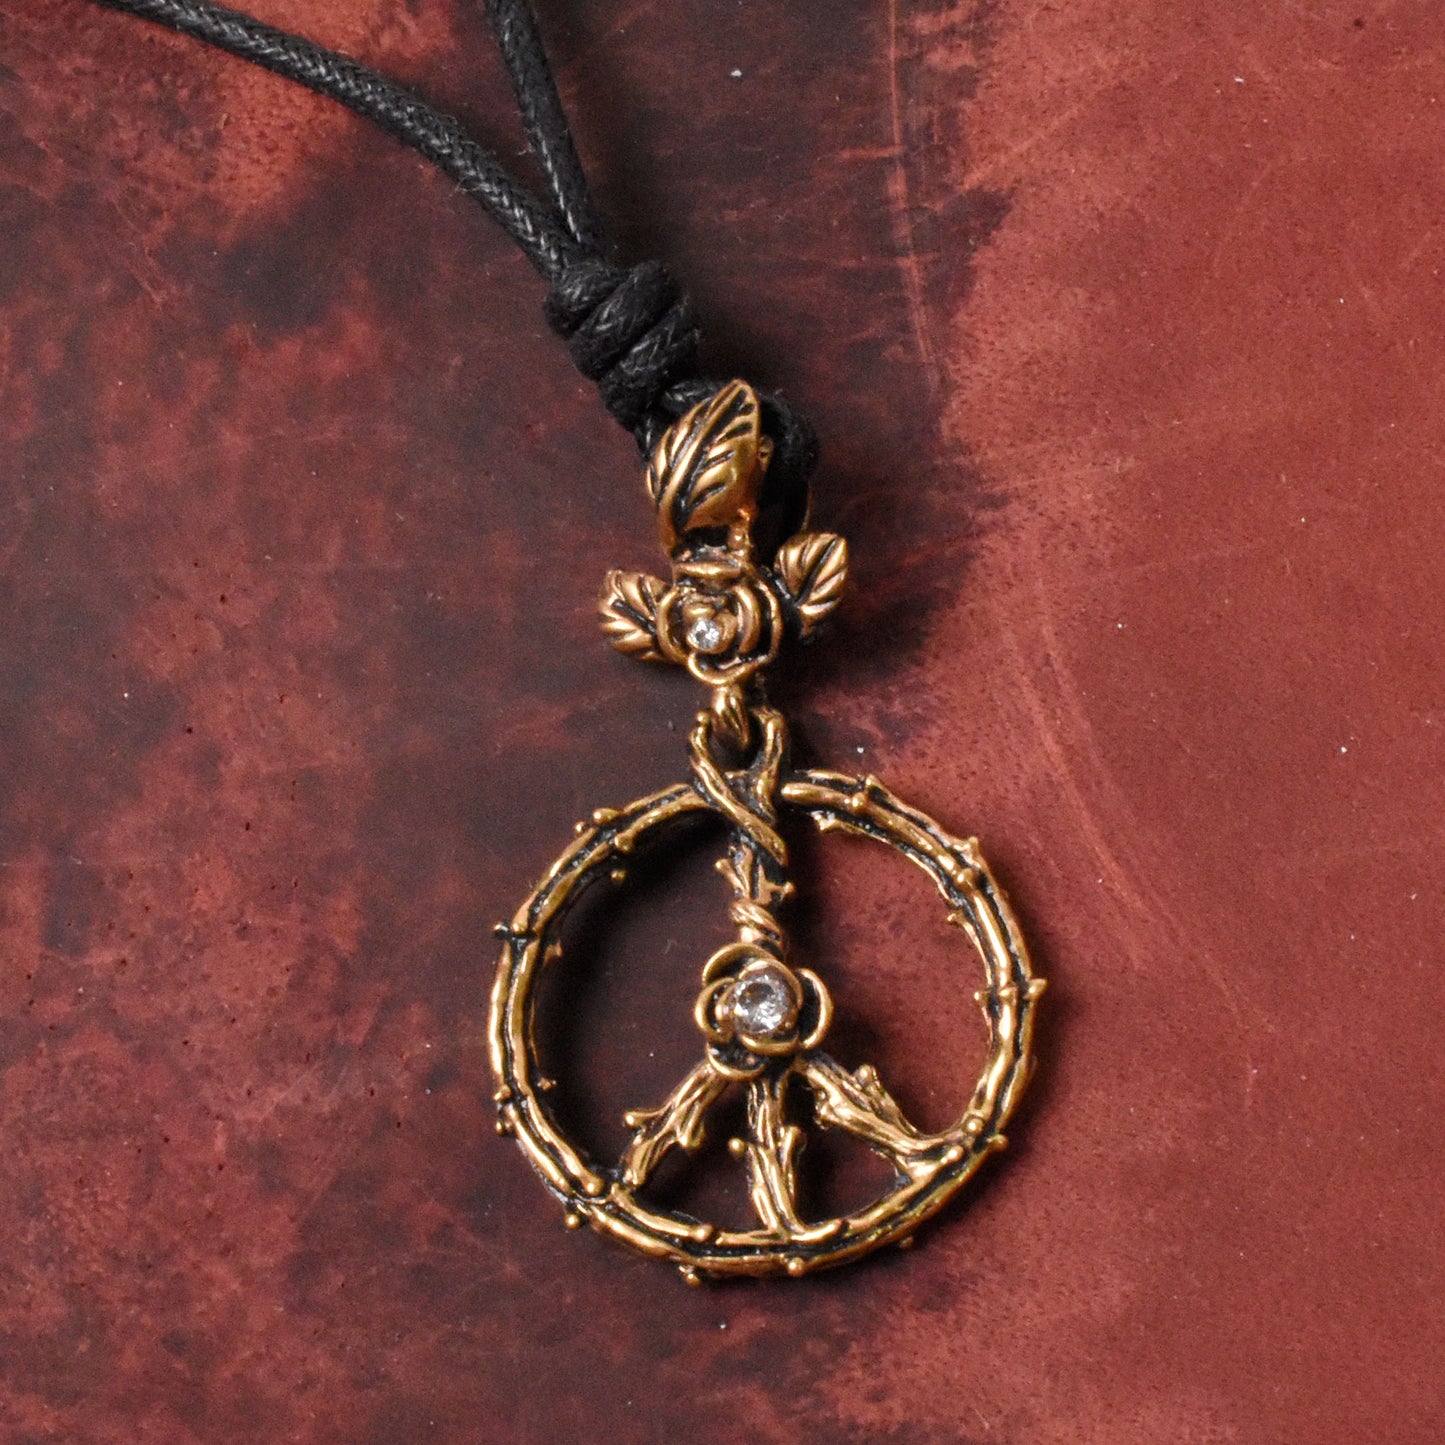 Peace Sign Roses Handmade Brass Necklace Pendant Jewelry With Cotton Cord